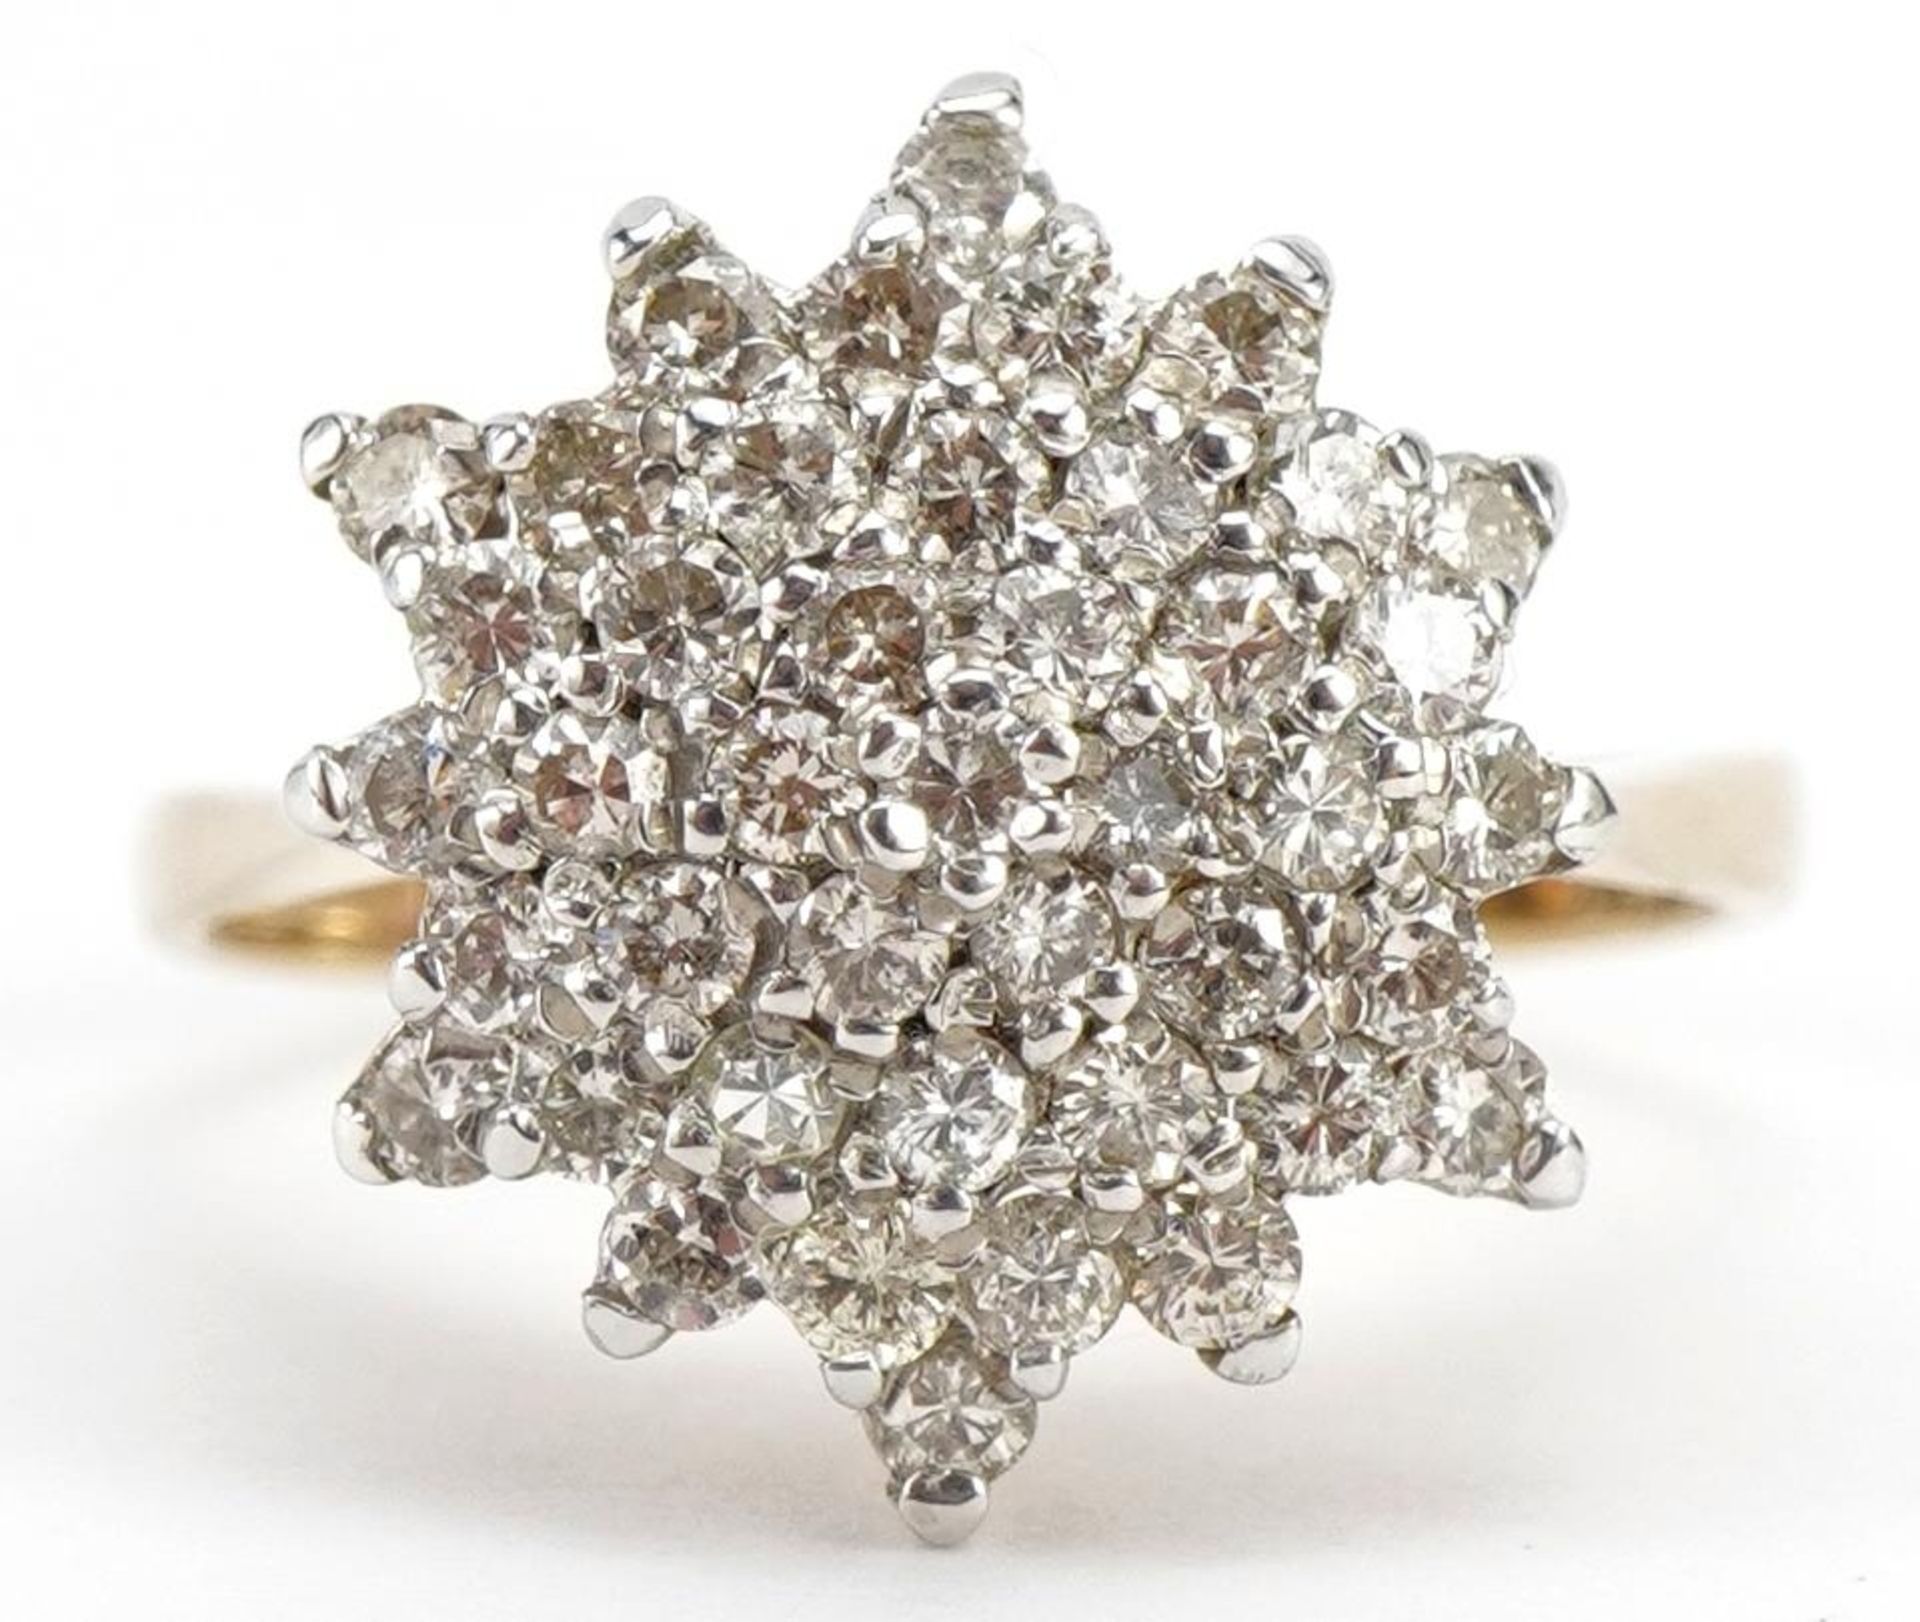 9ct gold diamond cluster ring, size P, 3.6g